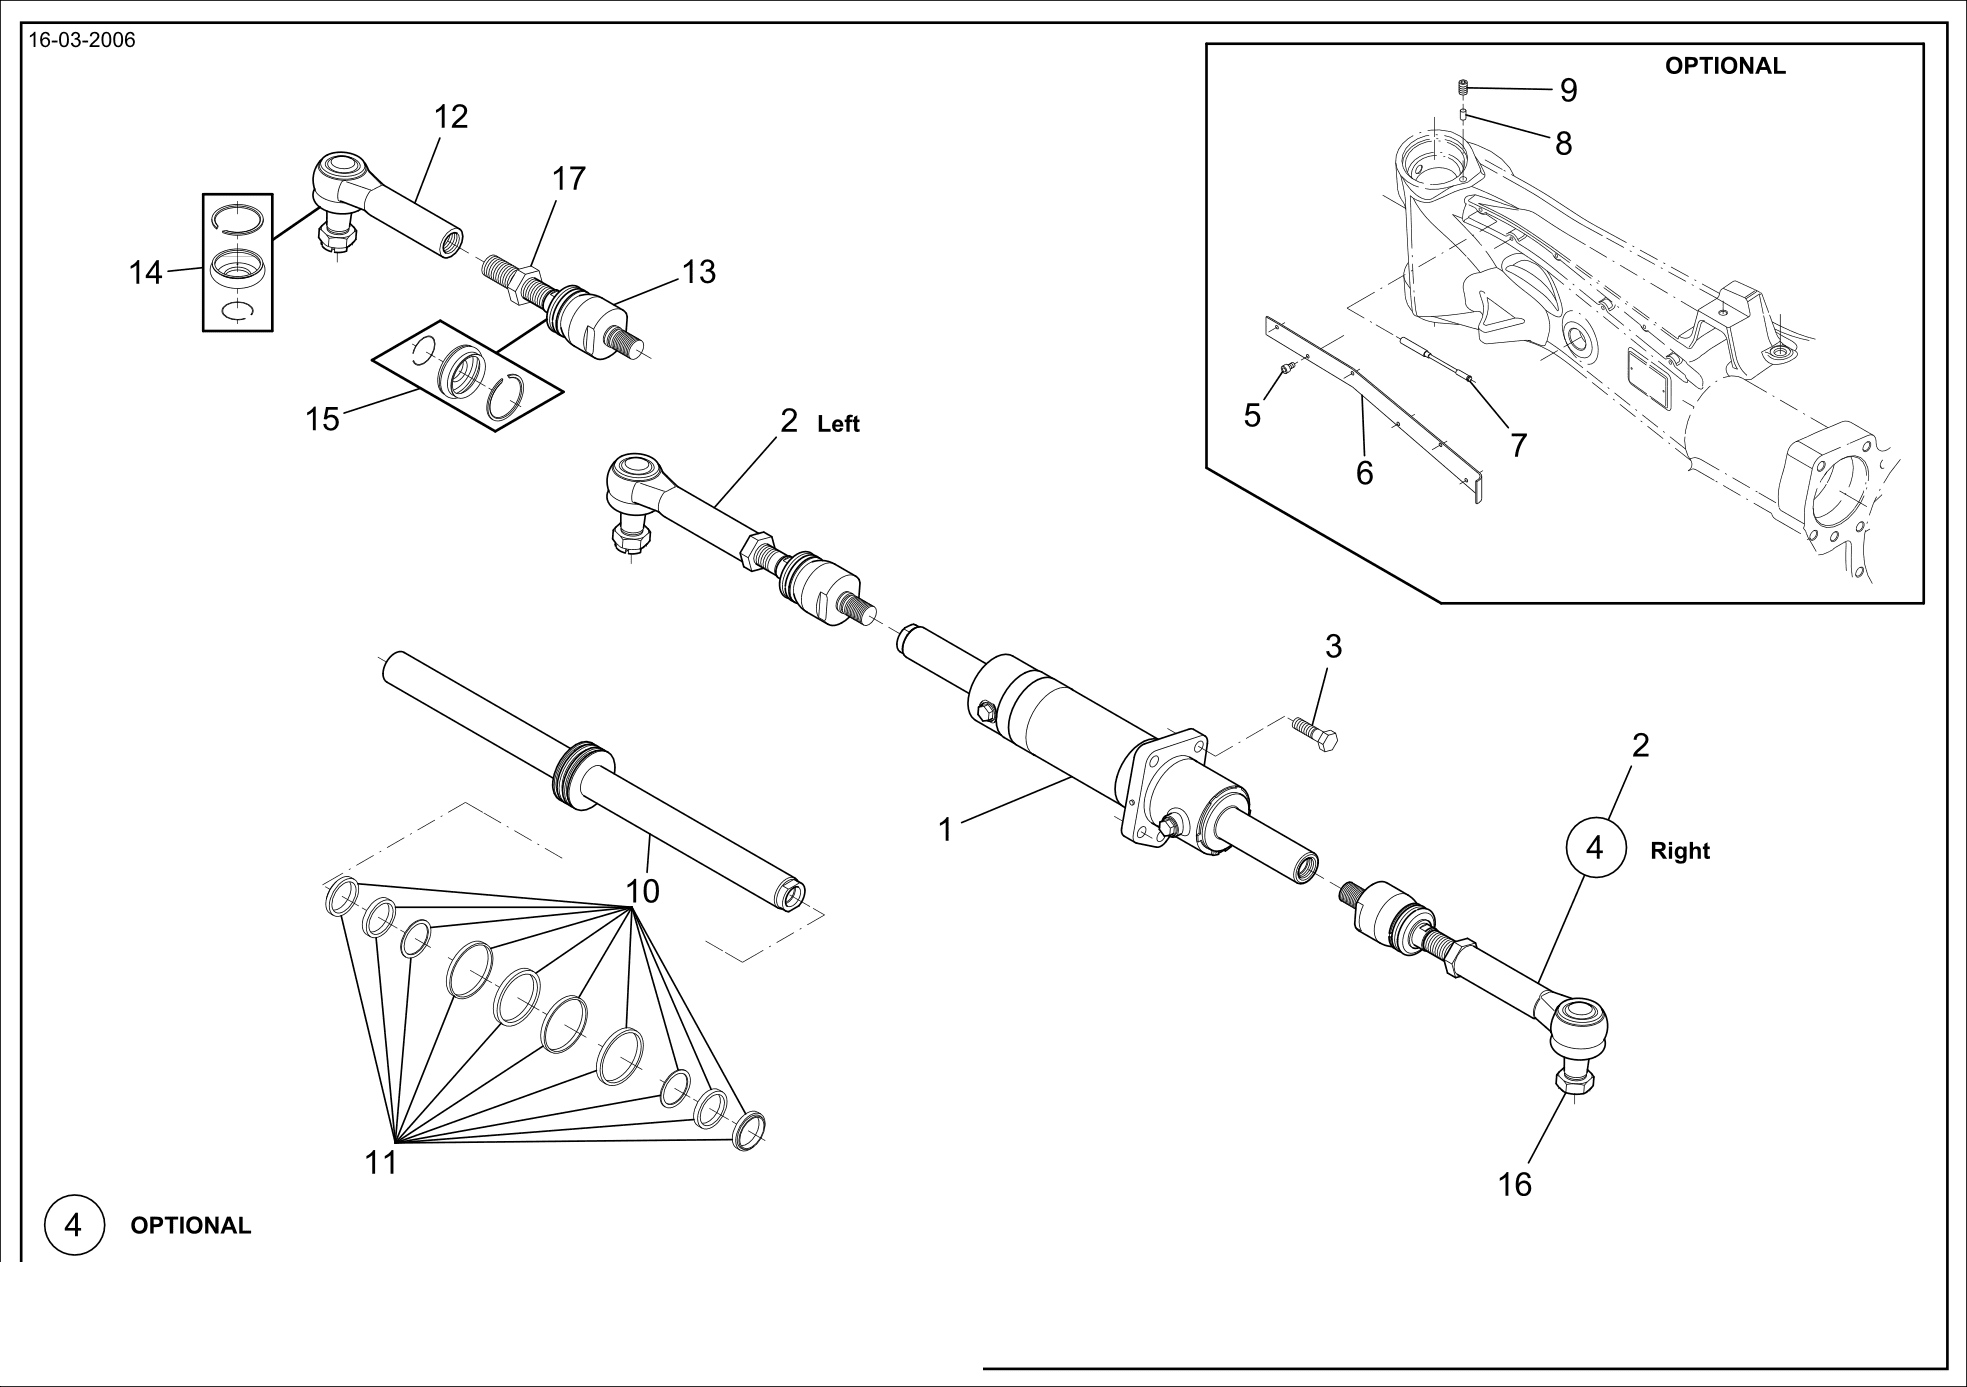 drawing for ROTA 3084022 - JOINT 90 (figure 1)